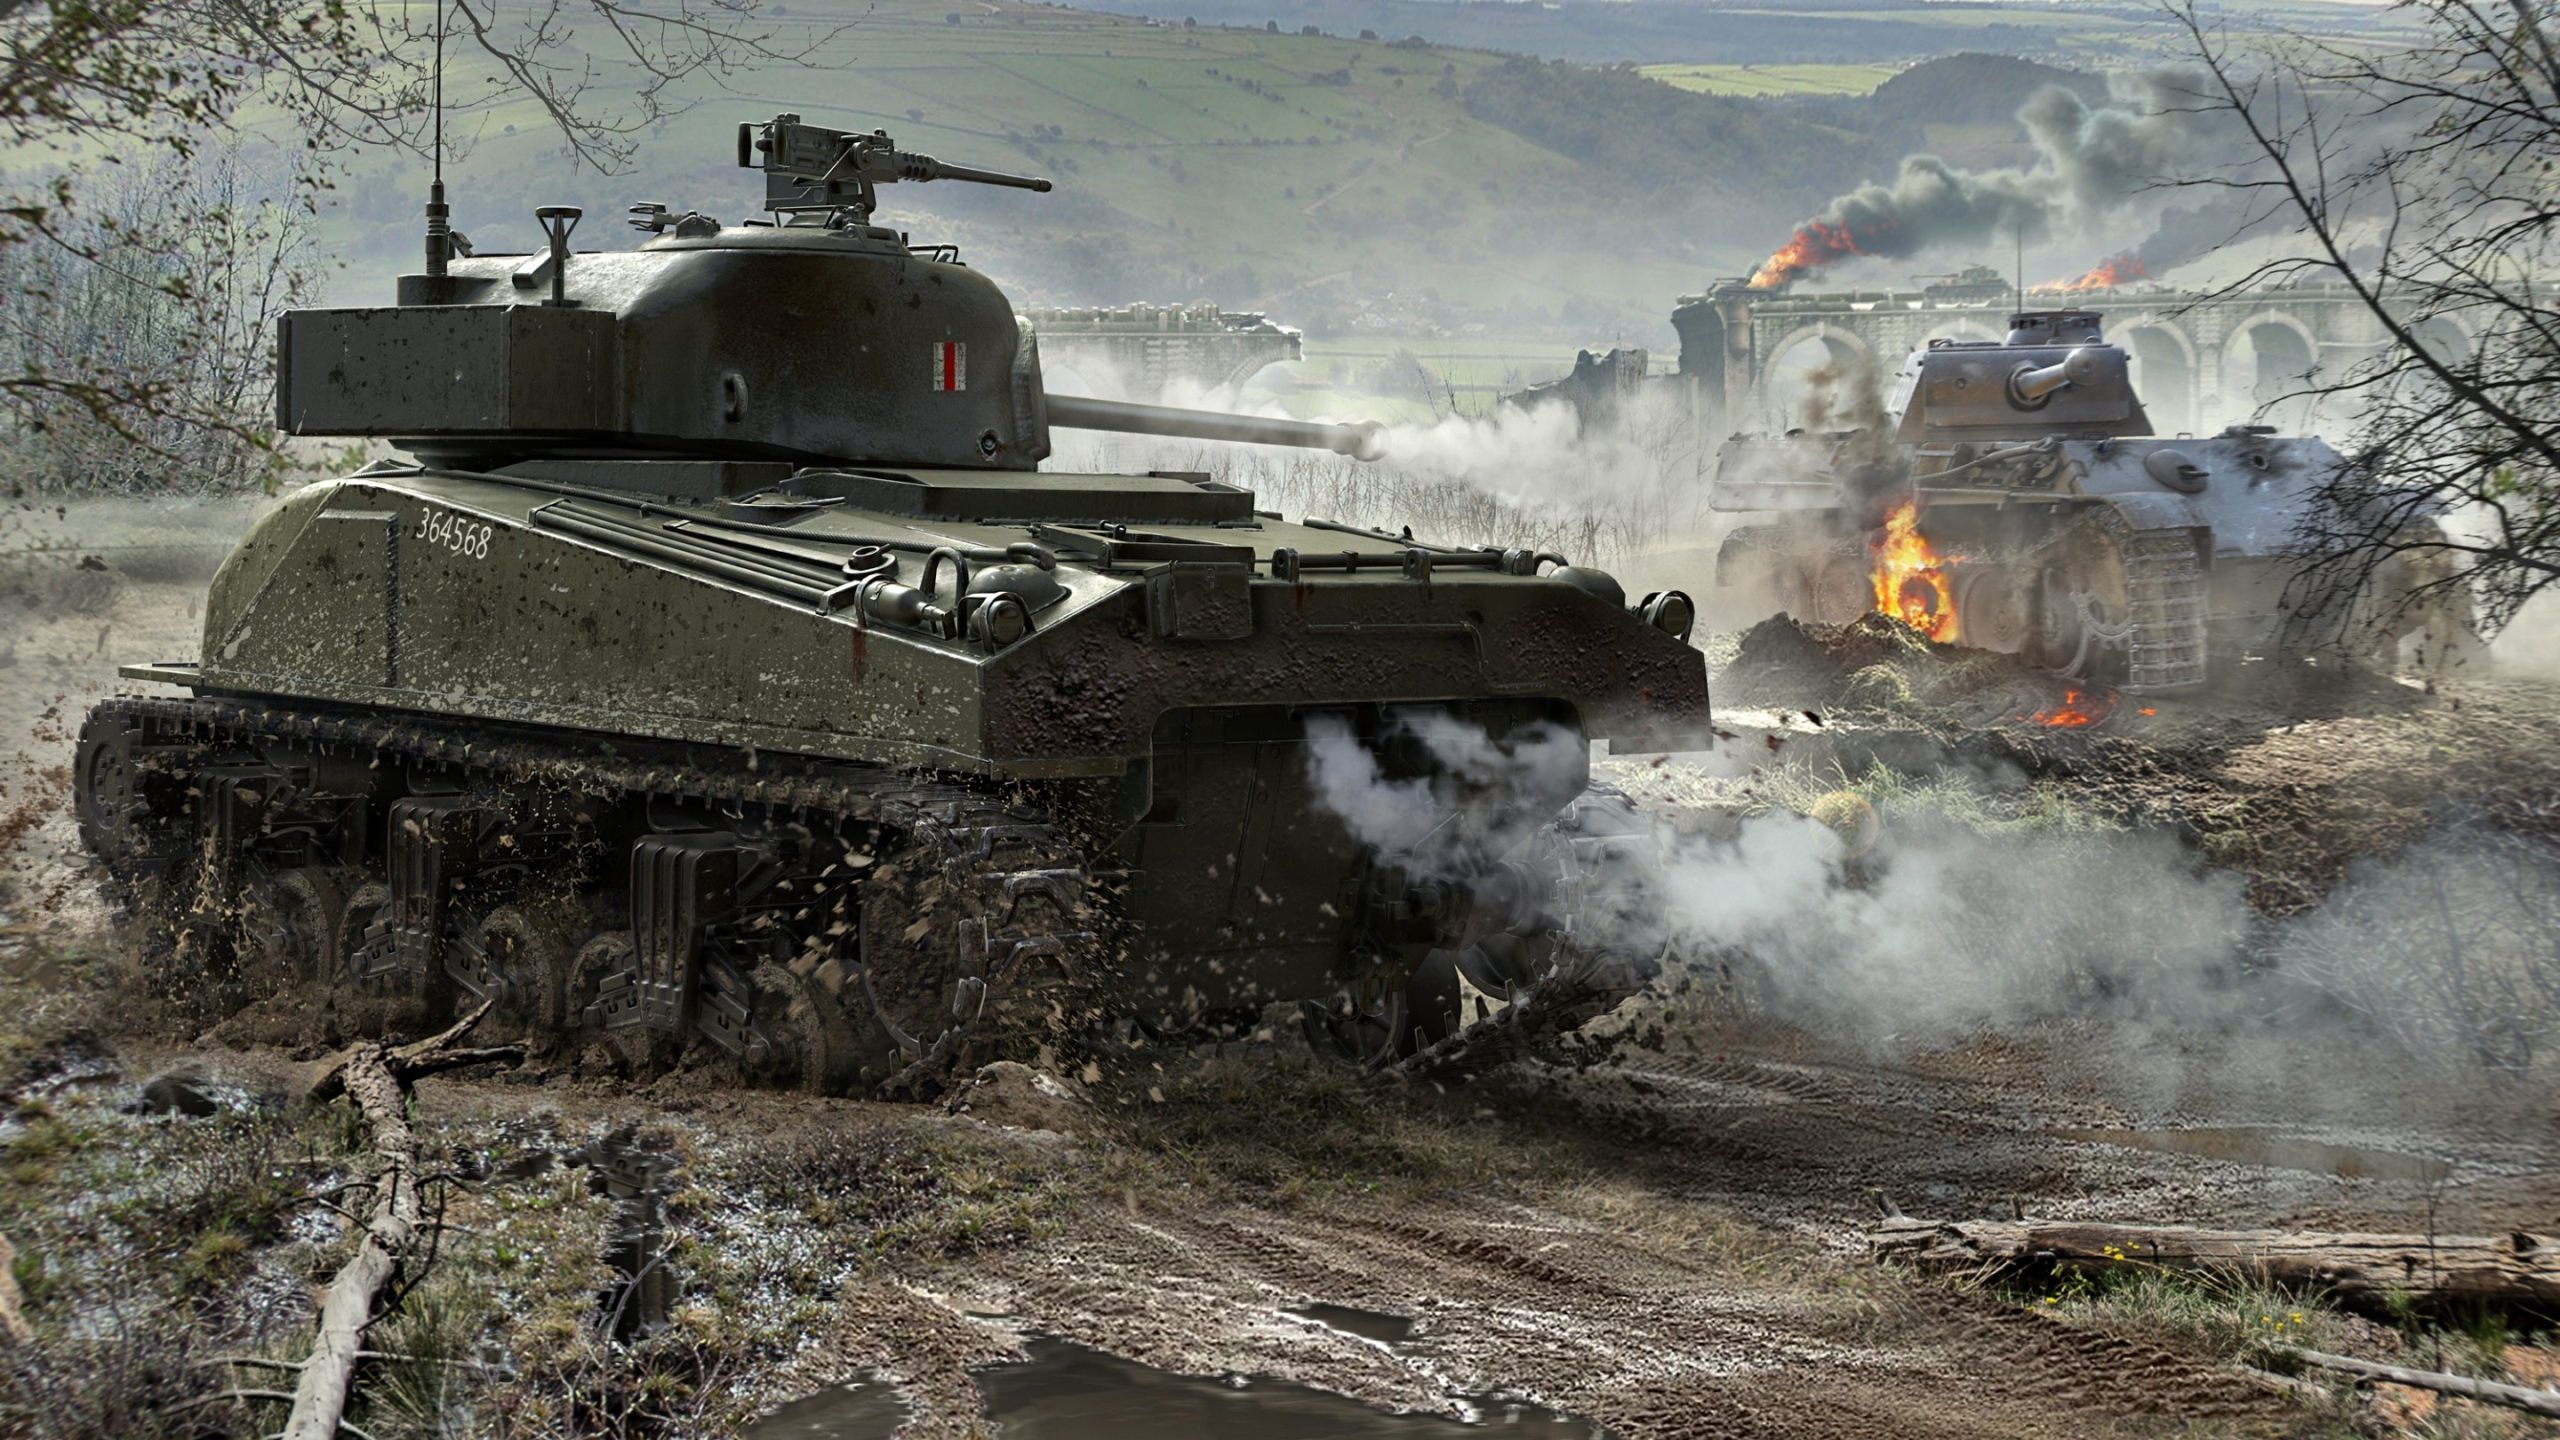 2560x1440 World Of Tanks Wargaming Net Wot 1440p Resolution Wallpaper Hd Games 4k Wallpapers Images Photos And Background